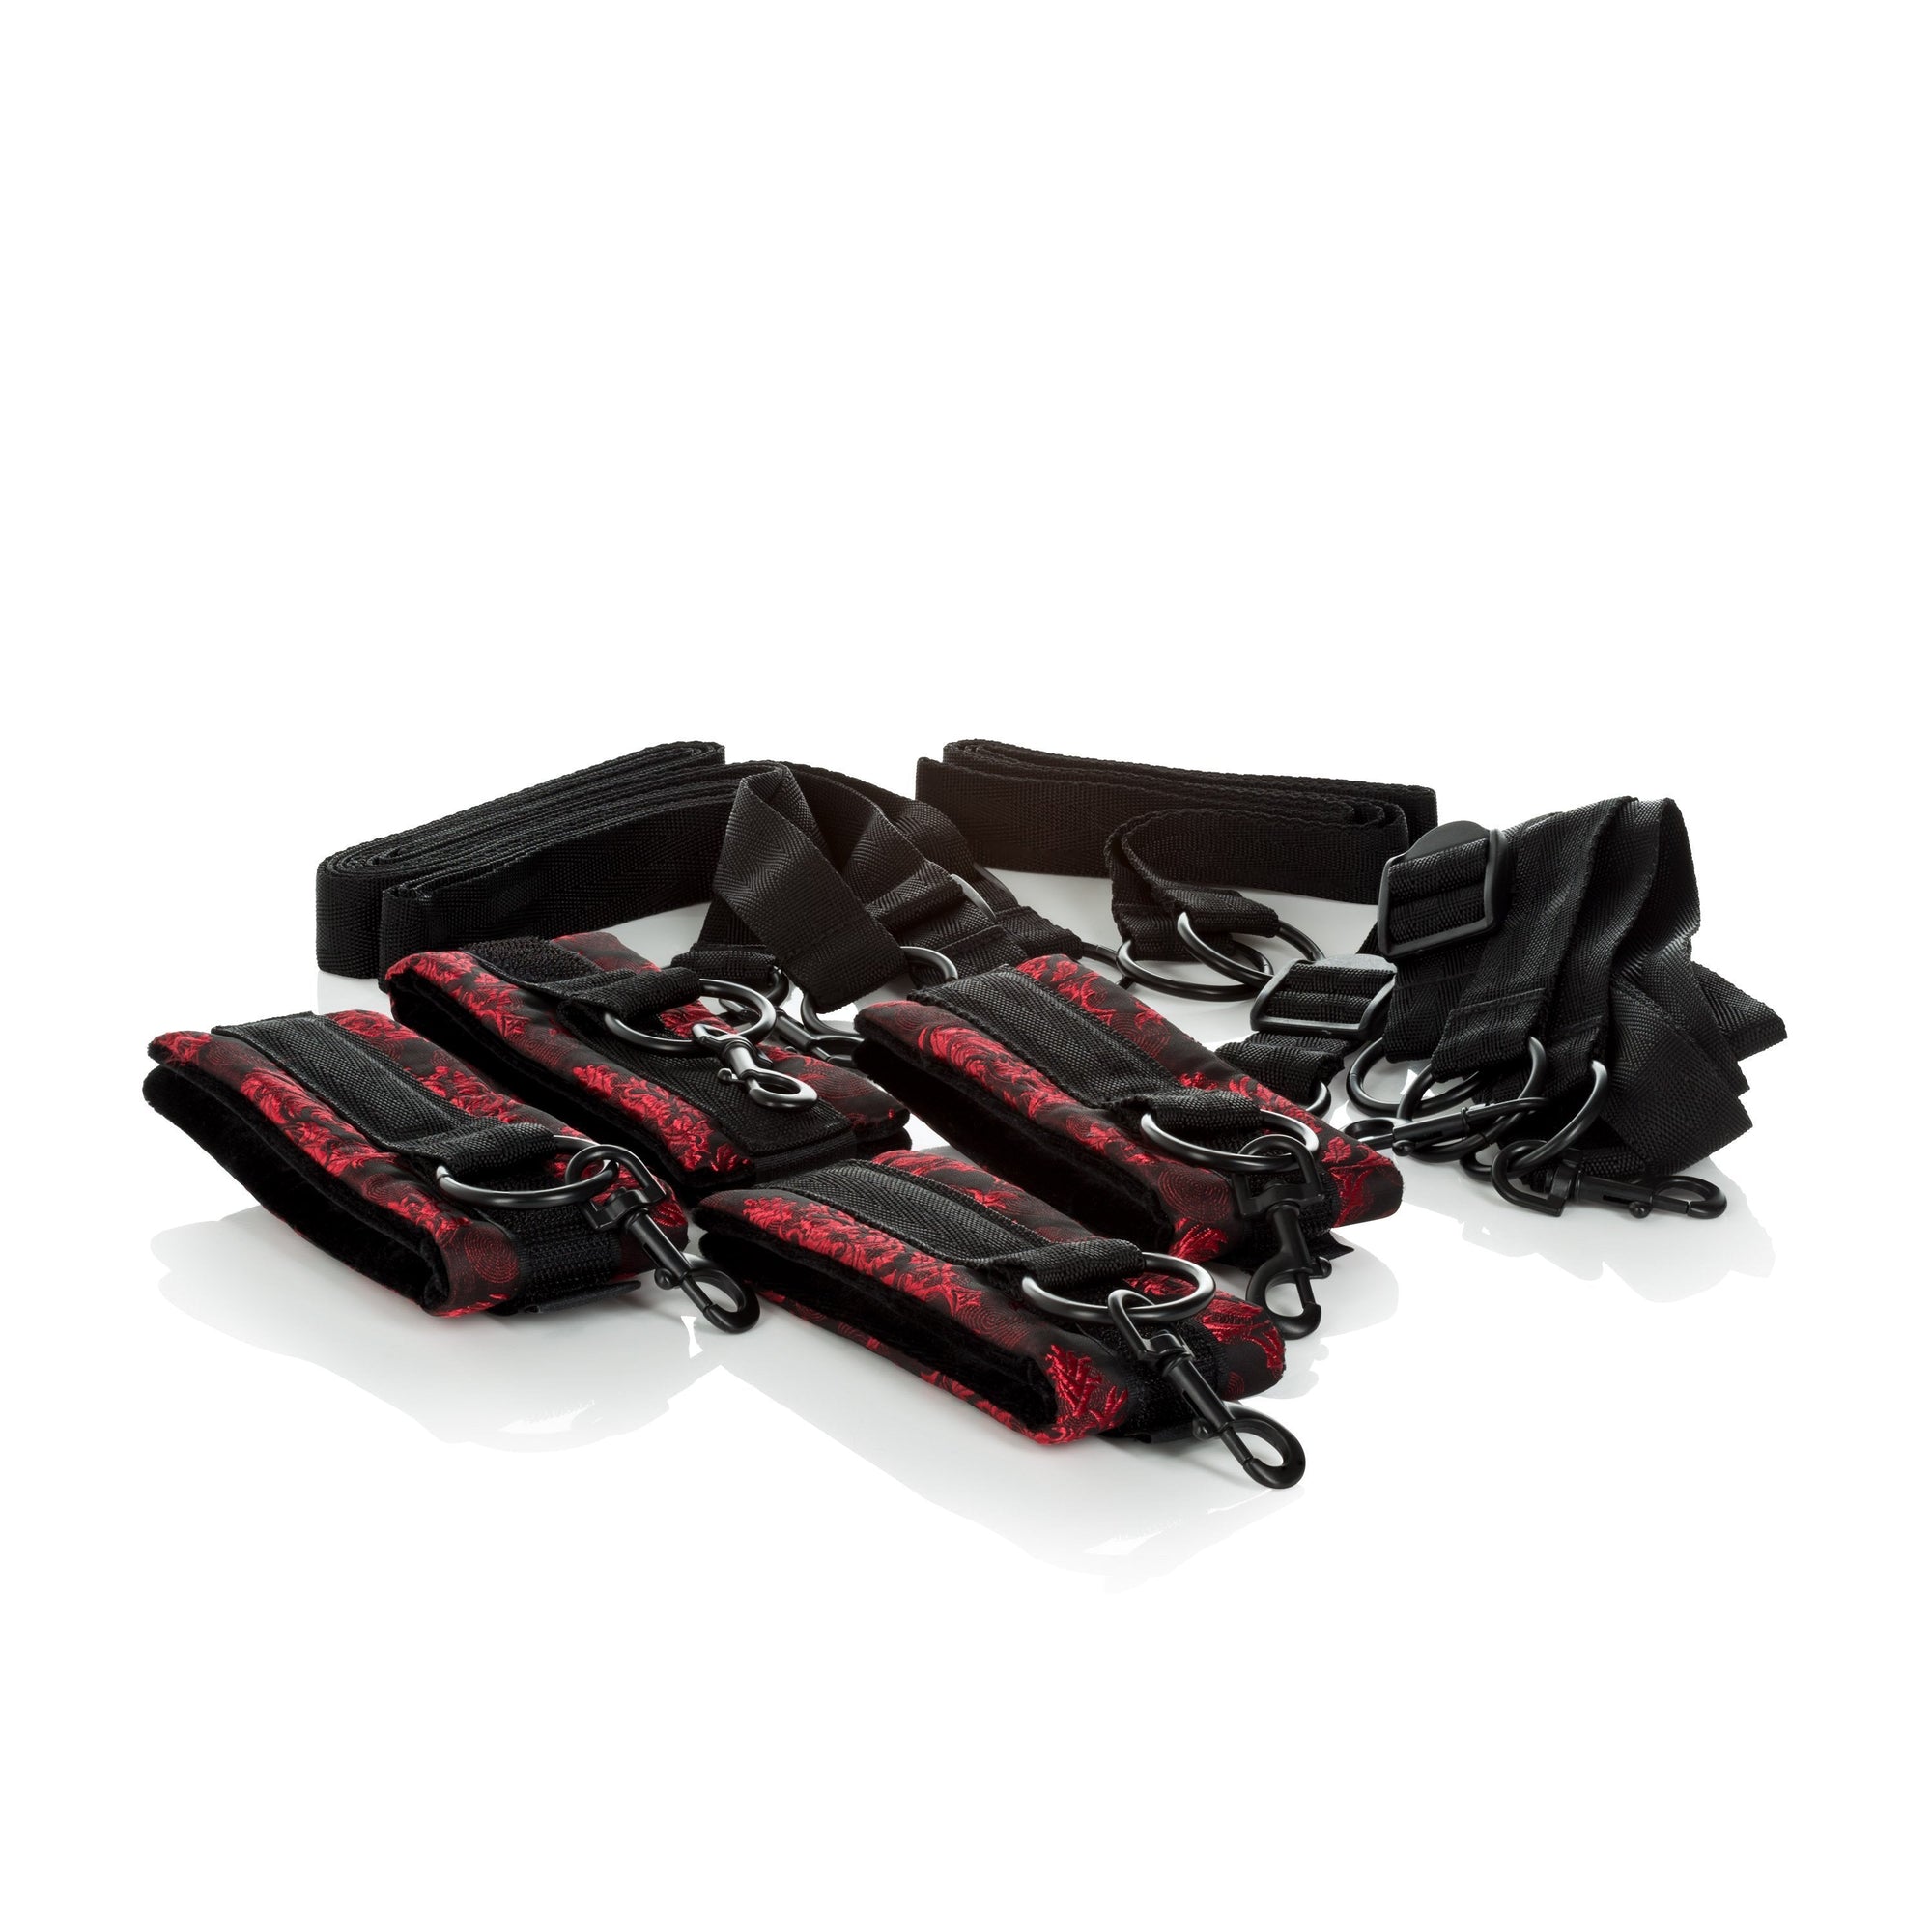 California Exotics - Scandal Bed Restraints (Red) -  Bed Restraint  Durio.sg